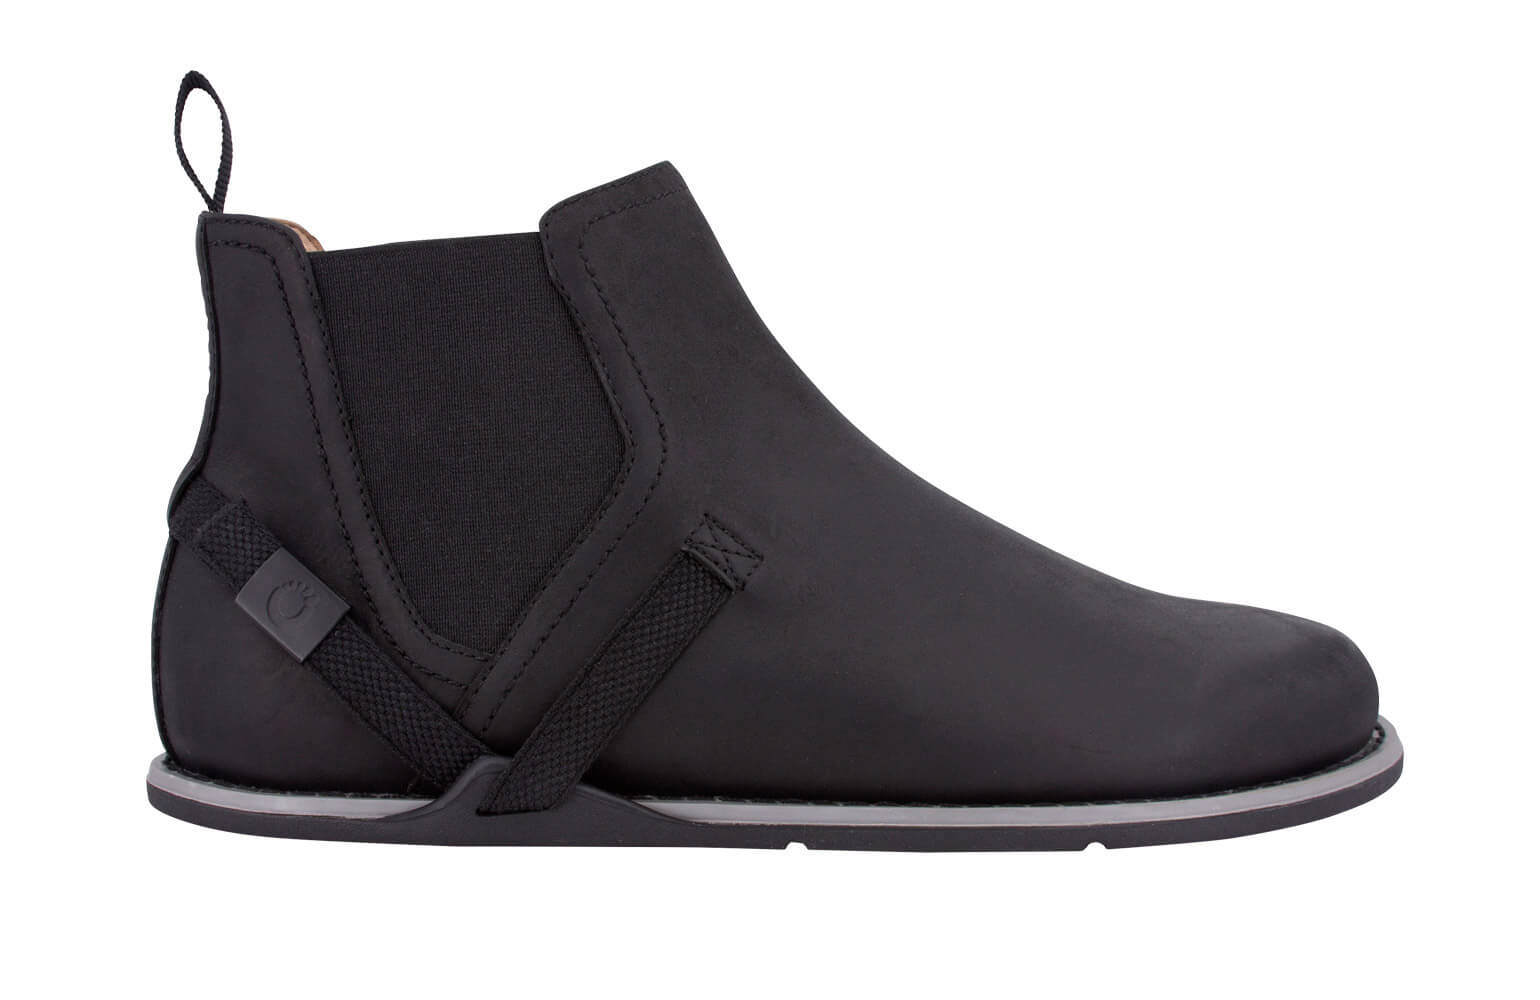 Melbourne (Clearance) - Men's Chelsea style minimalist leather boot by ...